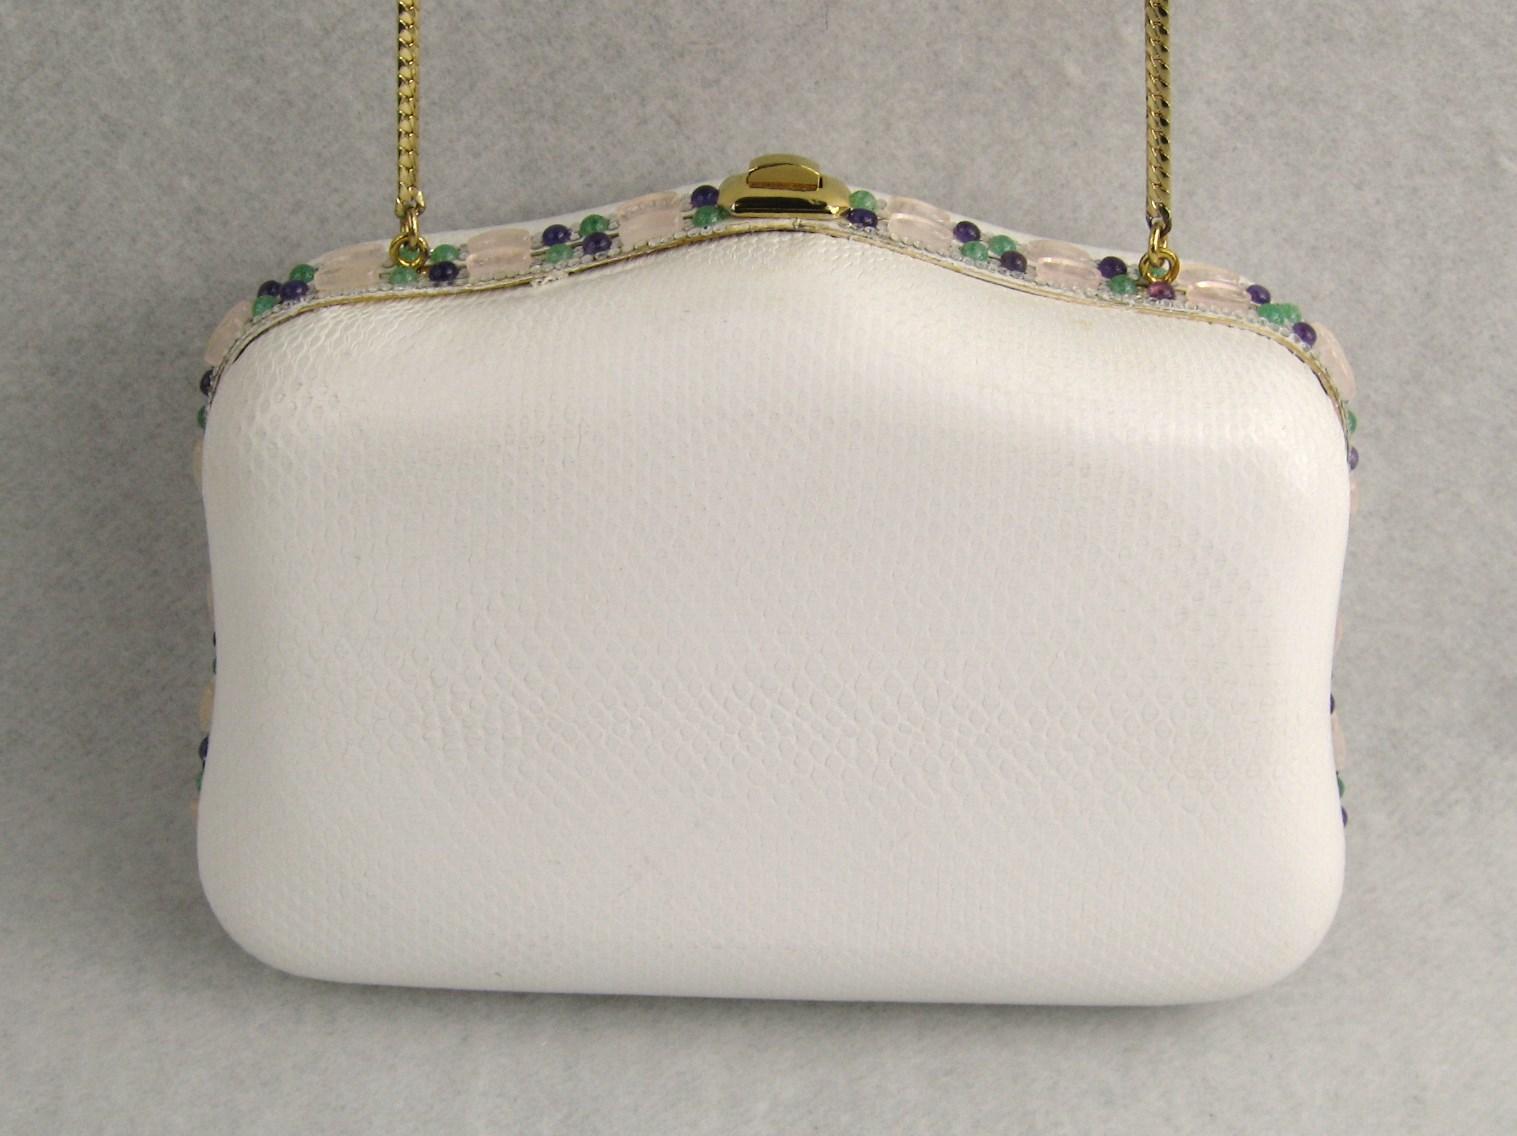 Judith Leiber White Karung Convertible Clutch With Semi Precious Jewels For Sale 1